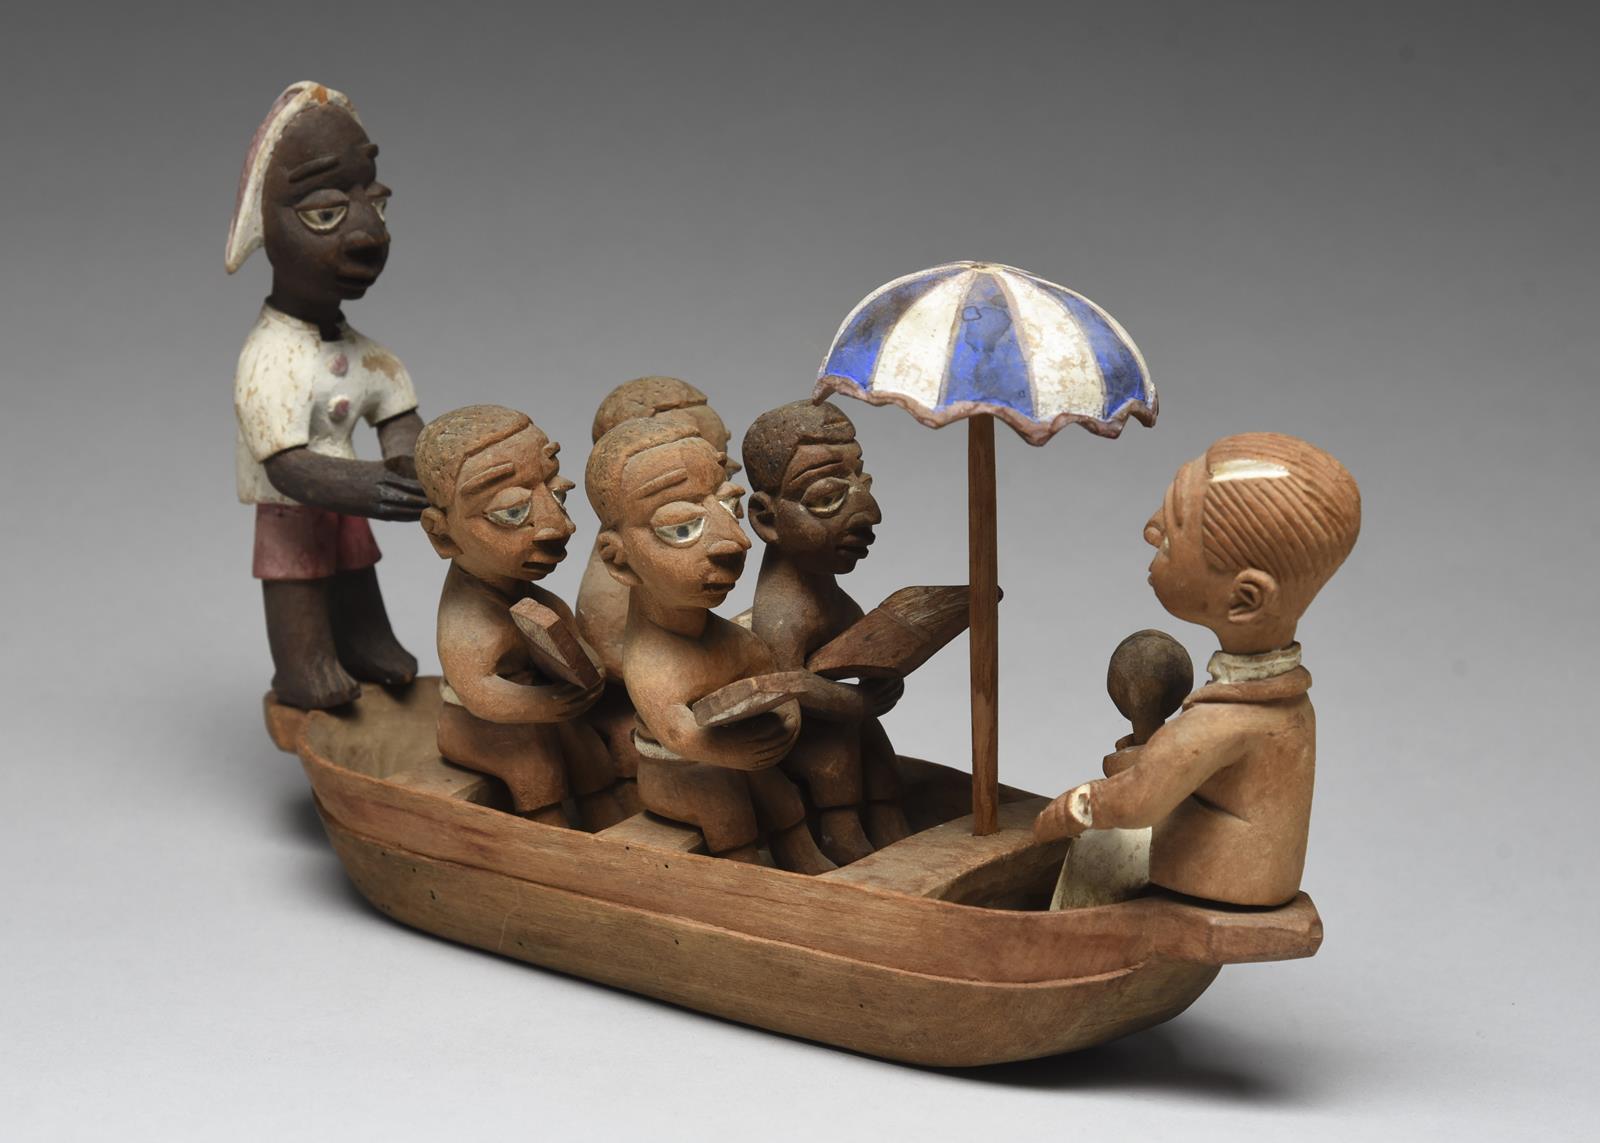 A Yoruba boat group by Thomas Ona Nigeria with a tiller man, four oarsmen with oars, an umbrella and - Image 3 of 4